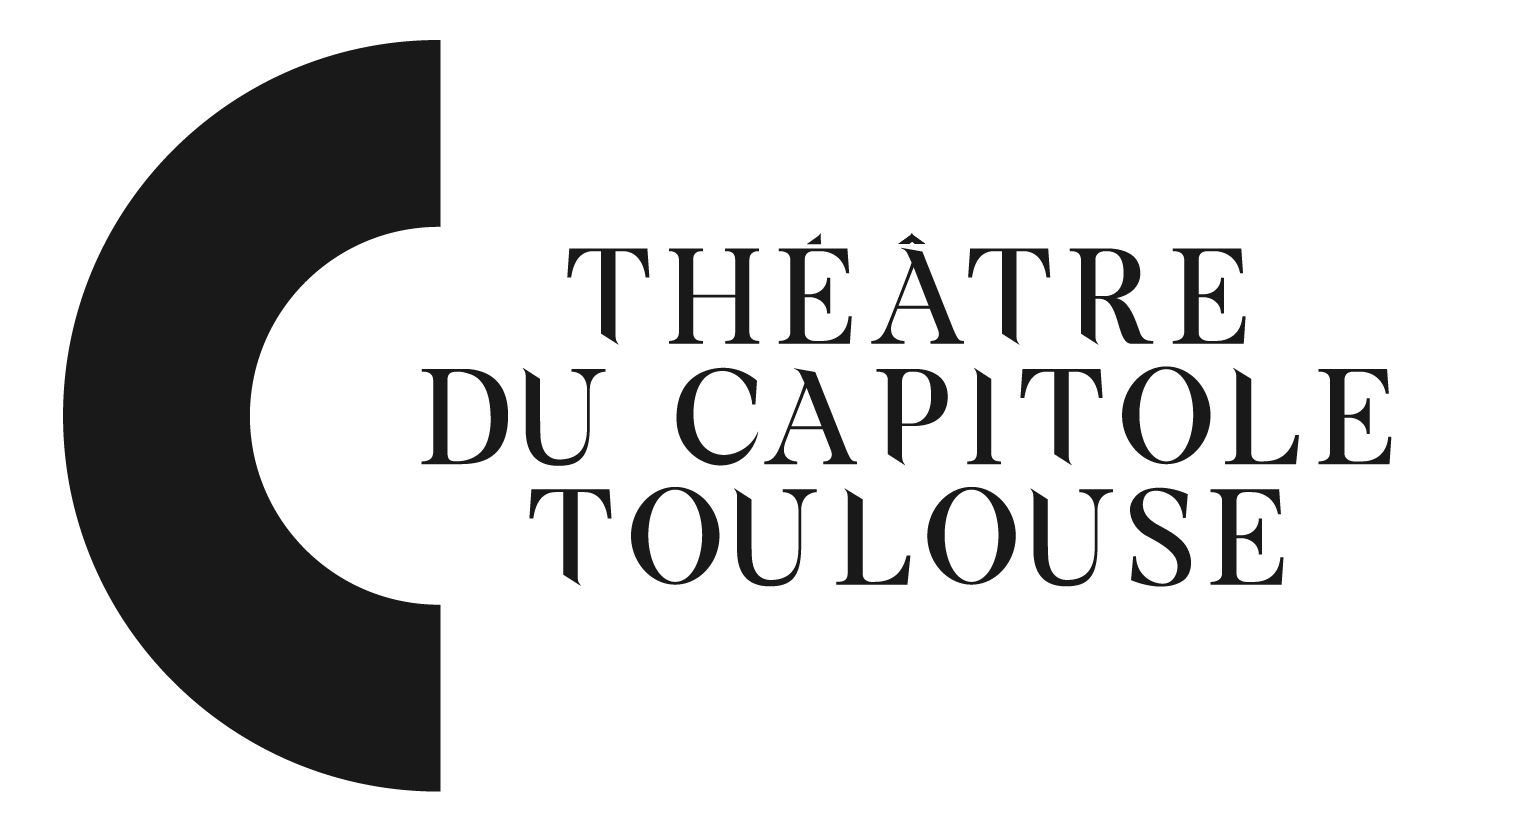 Costumes, wigs, make-up and technical inventory system for Théâtre du Capitole